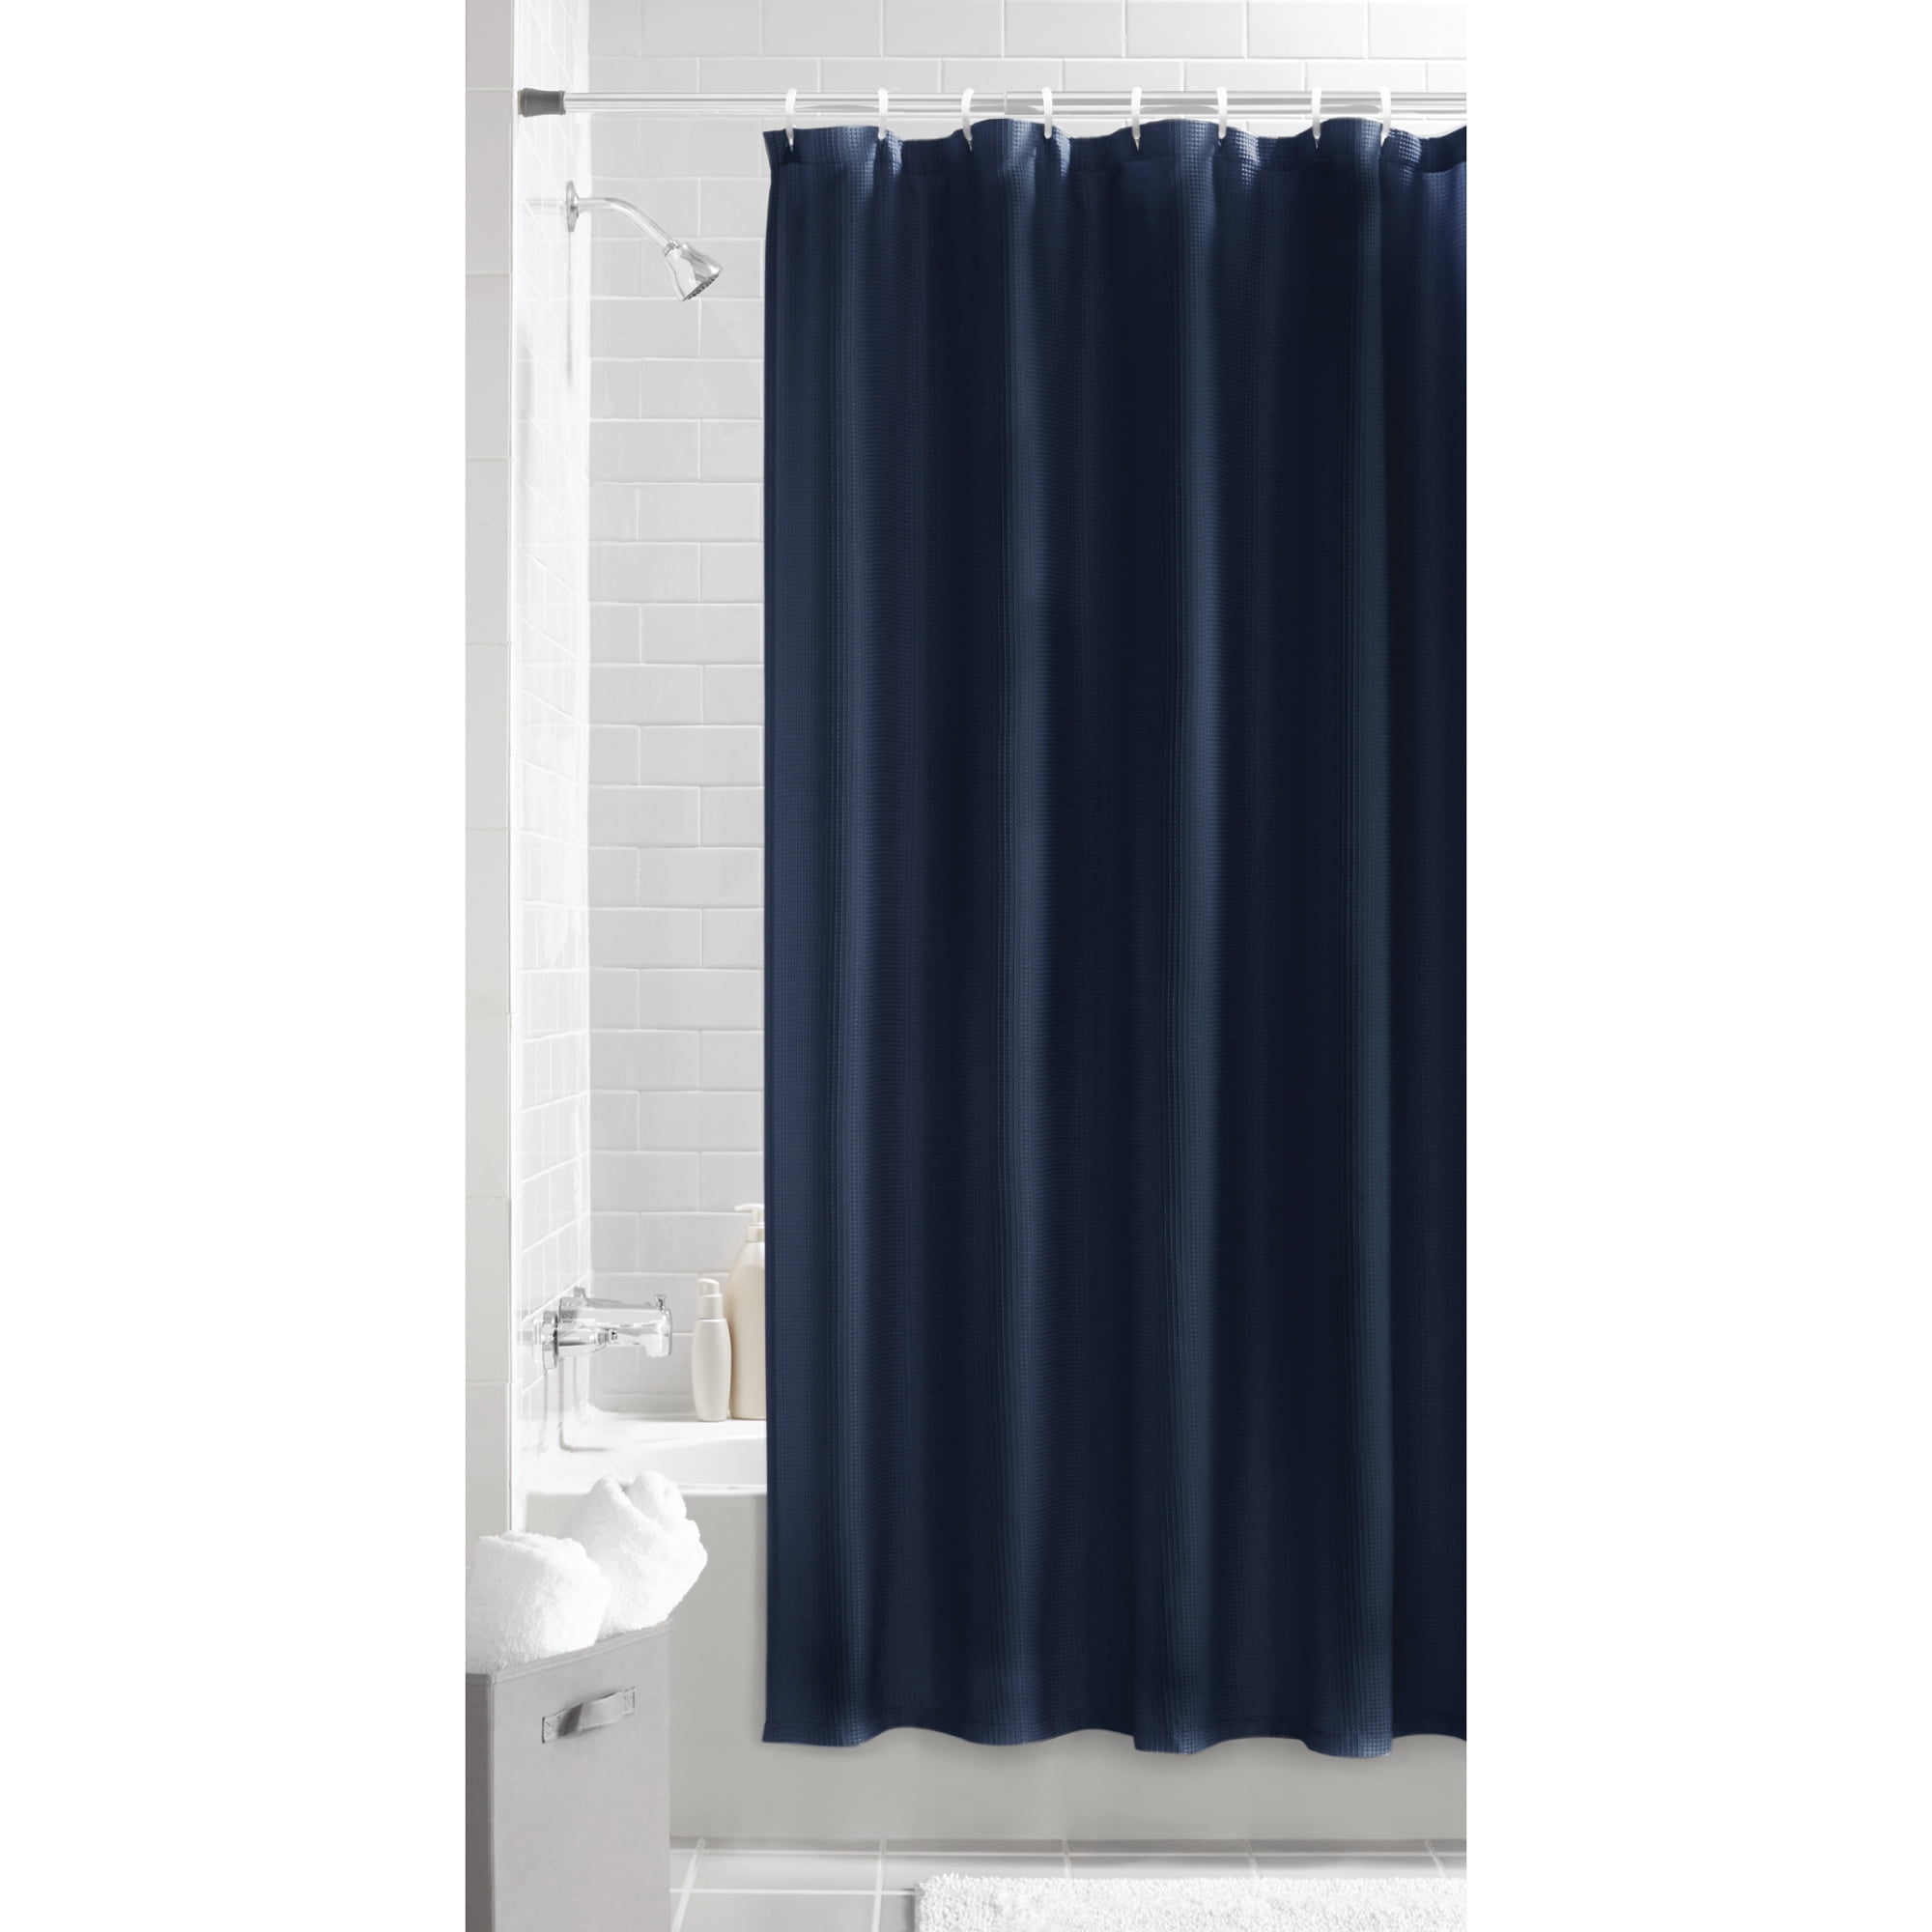 Navy Blue Fabric Shower Curtain 70 X, Navy Colored Shower Curtains